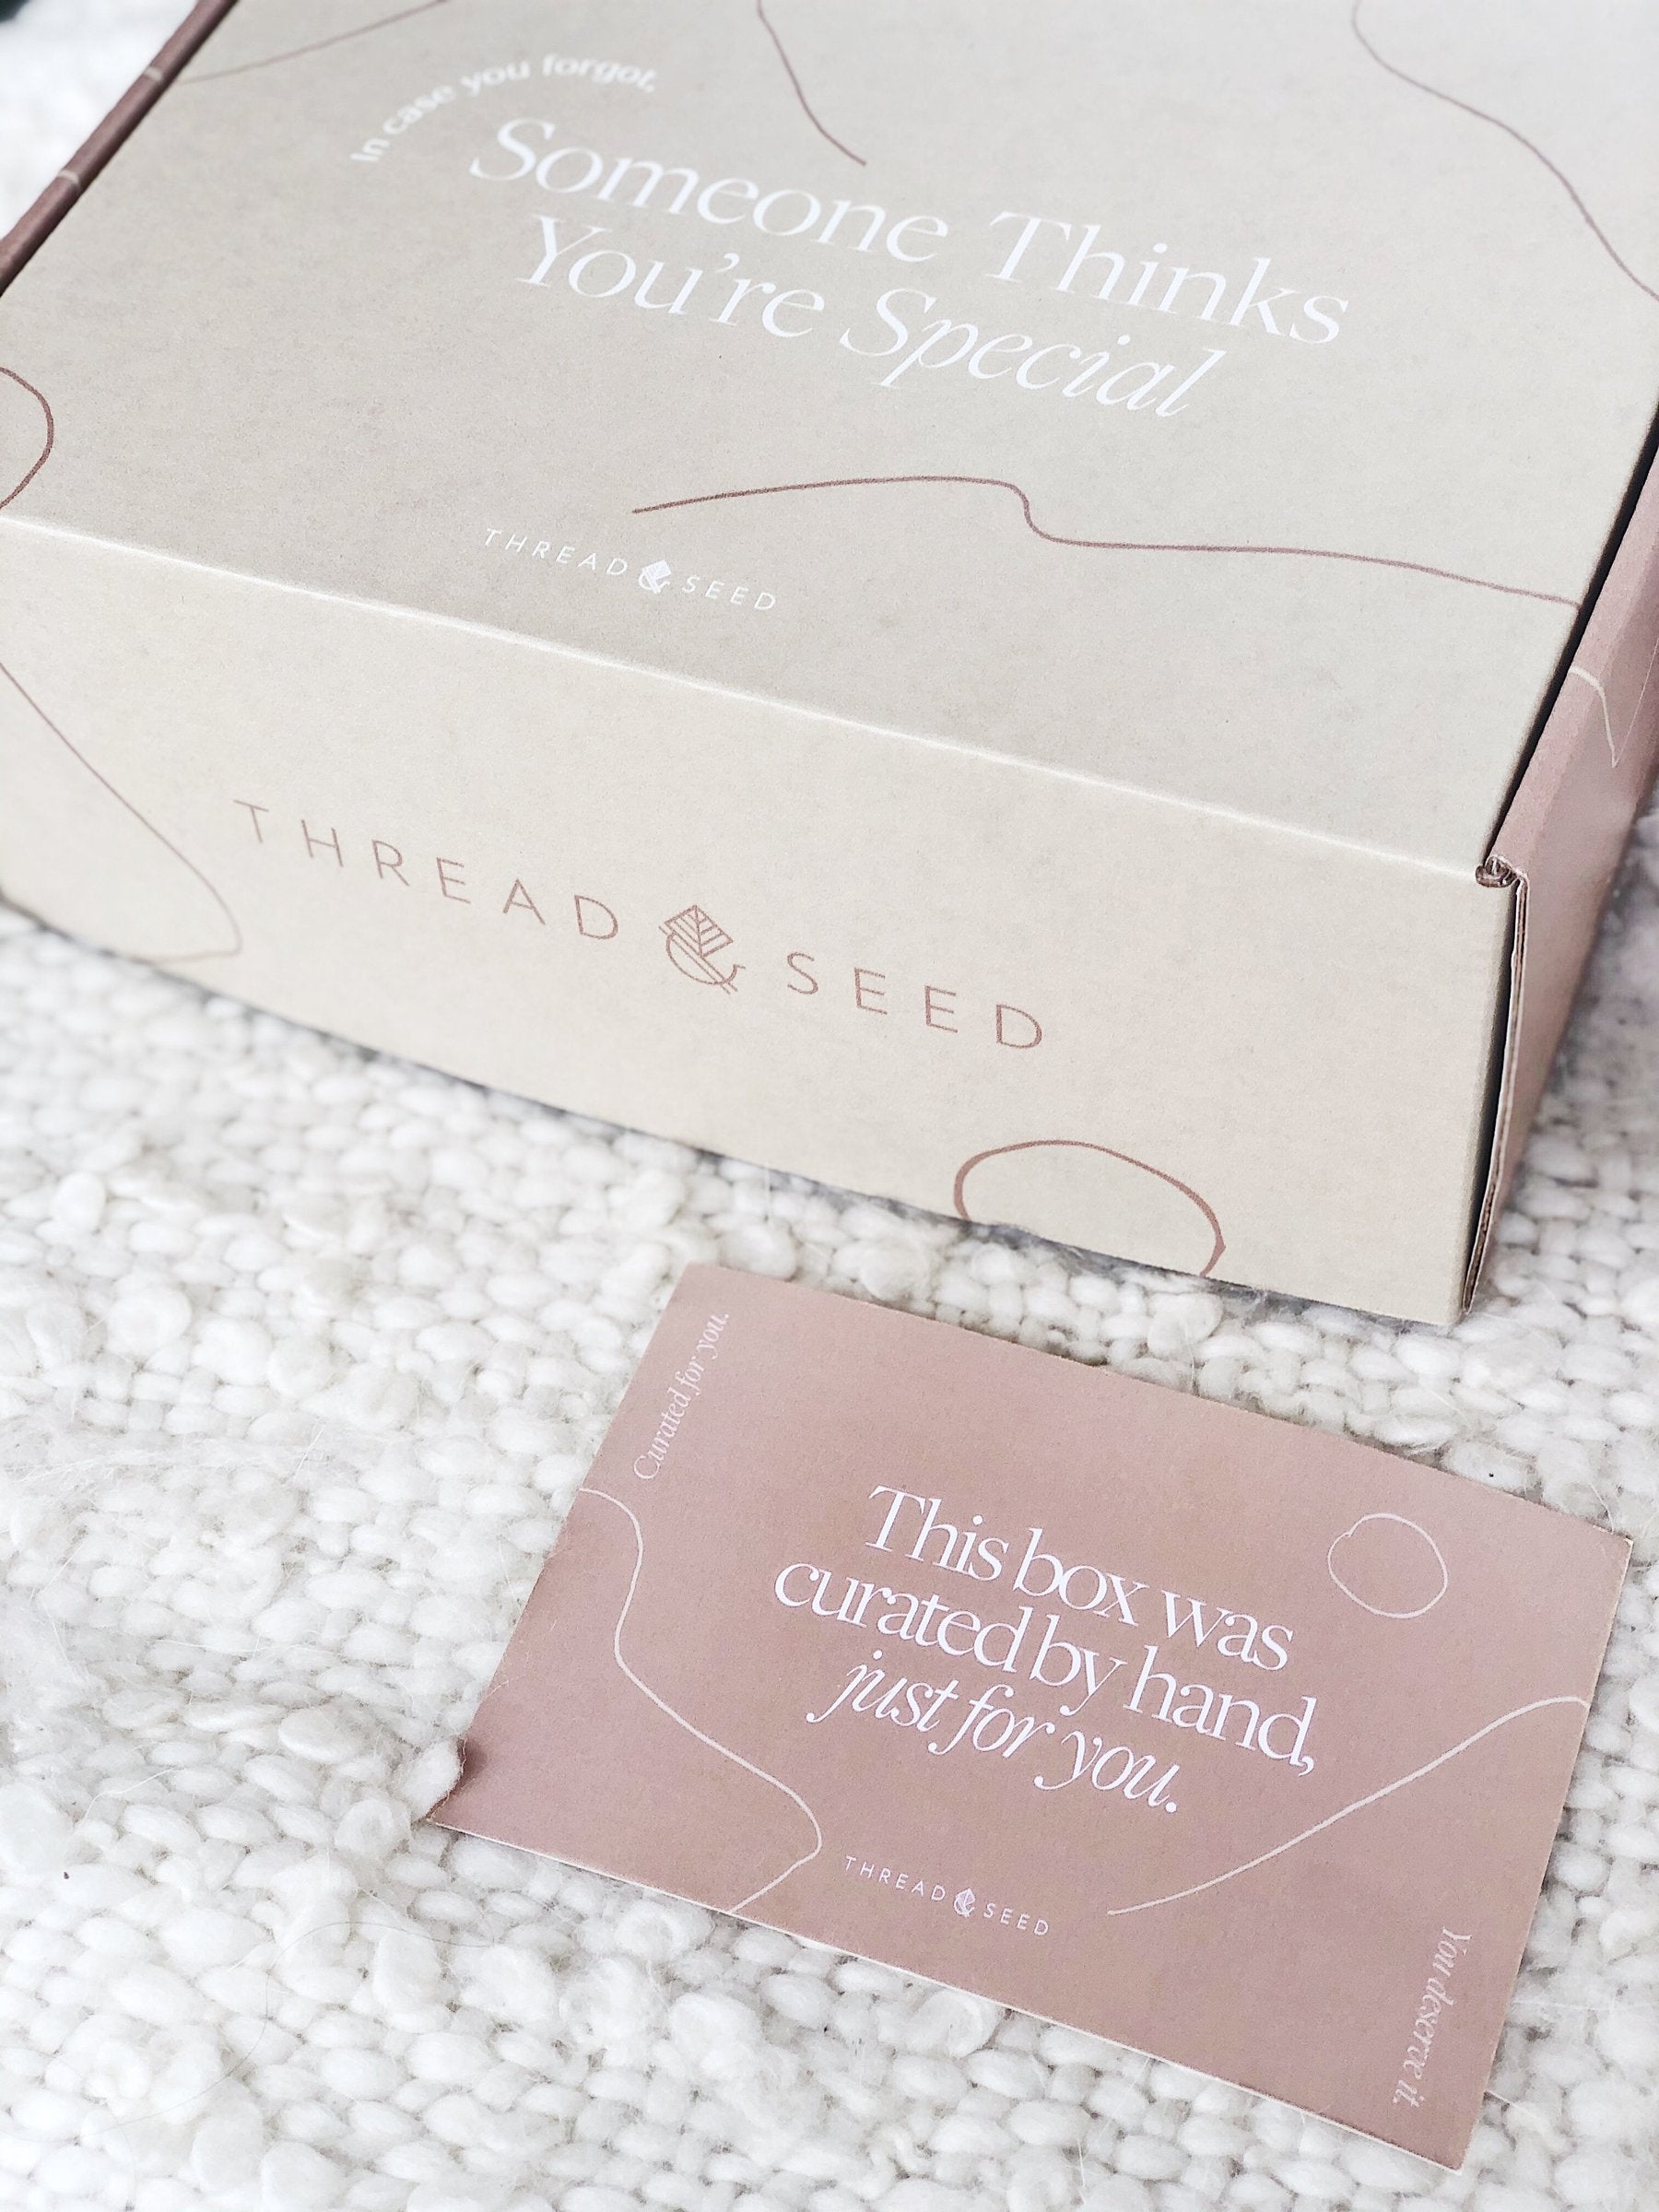 The Refresh + Relax Box